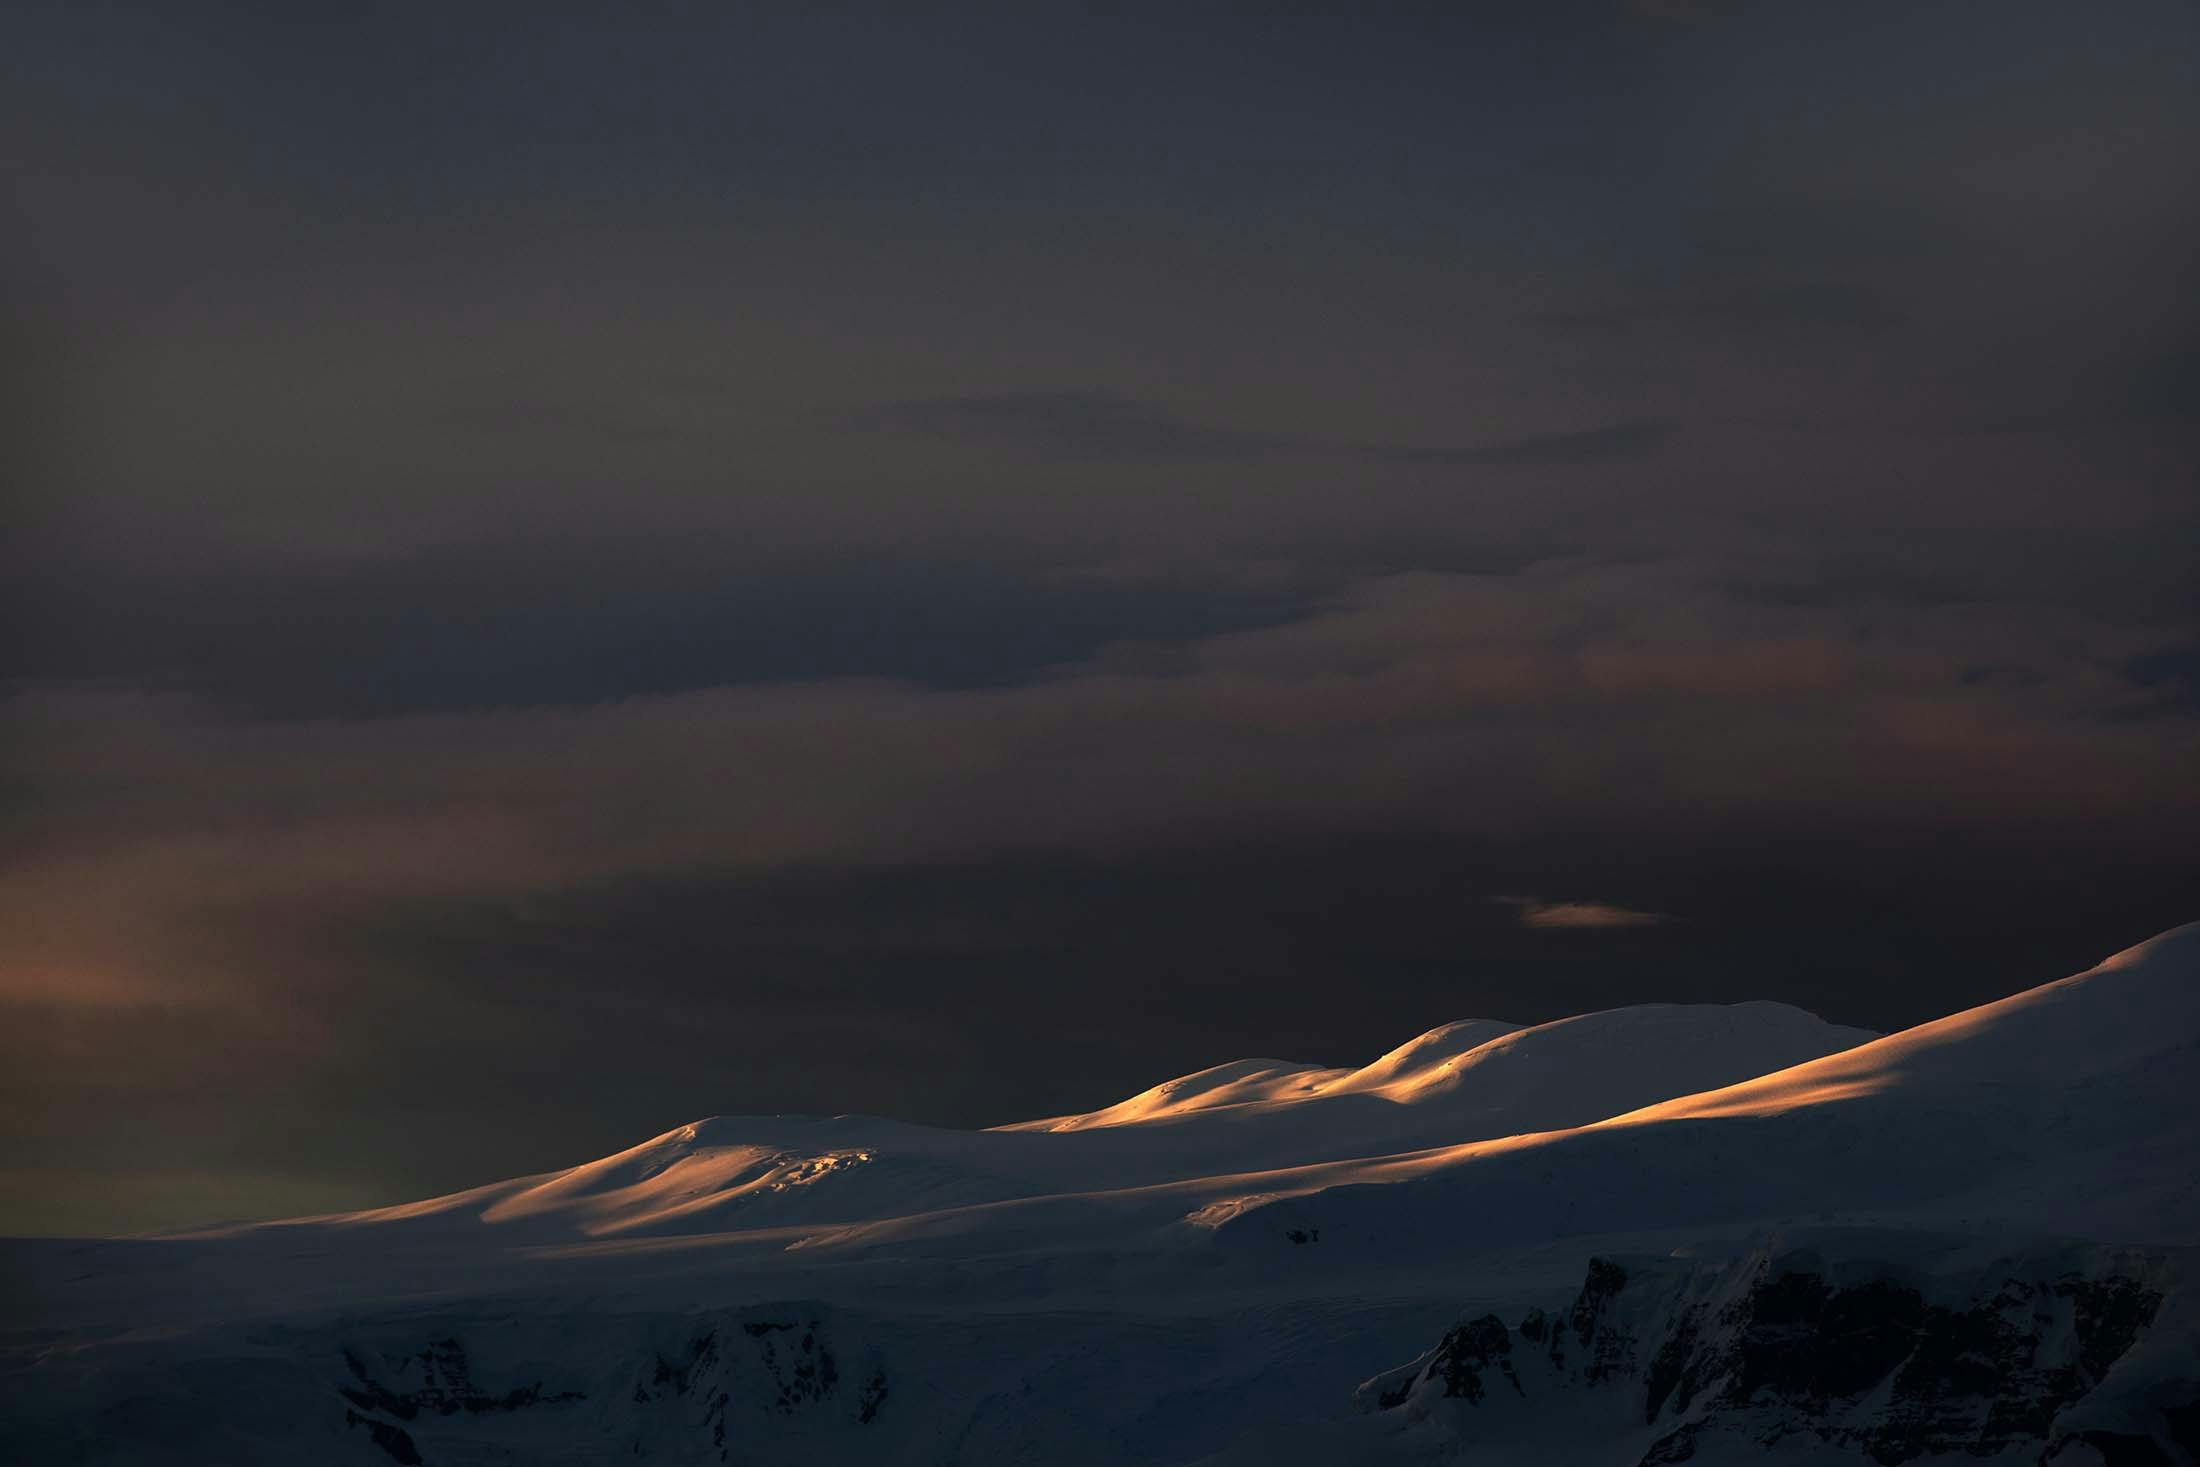 Learn how to take night photography in Antarctica.